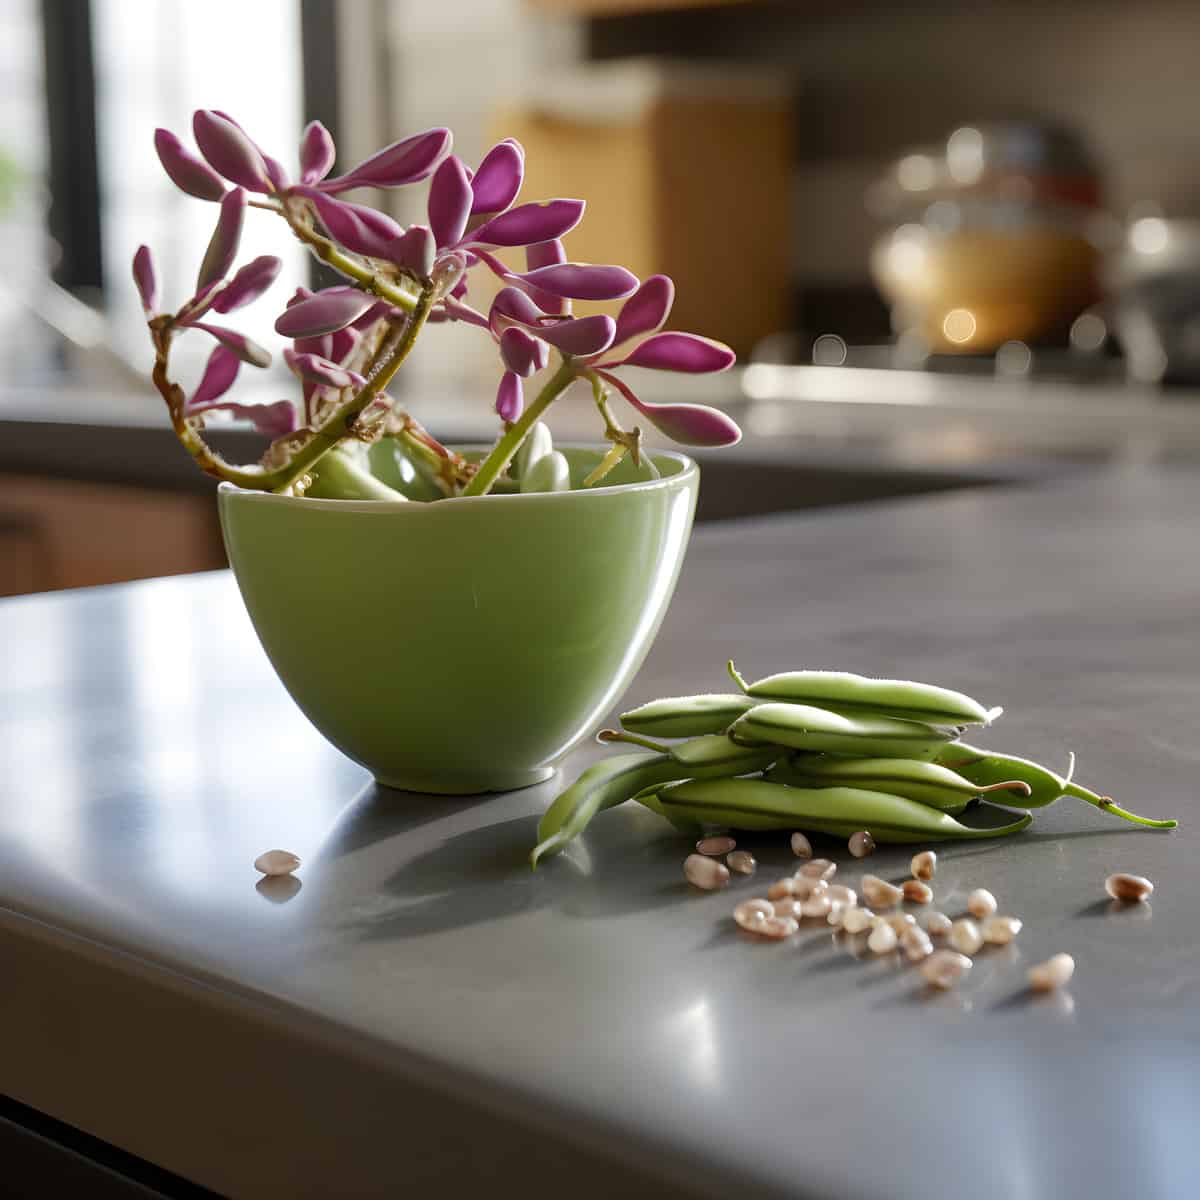 Field Beans on a kitchen counter